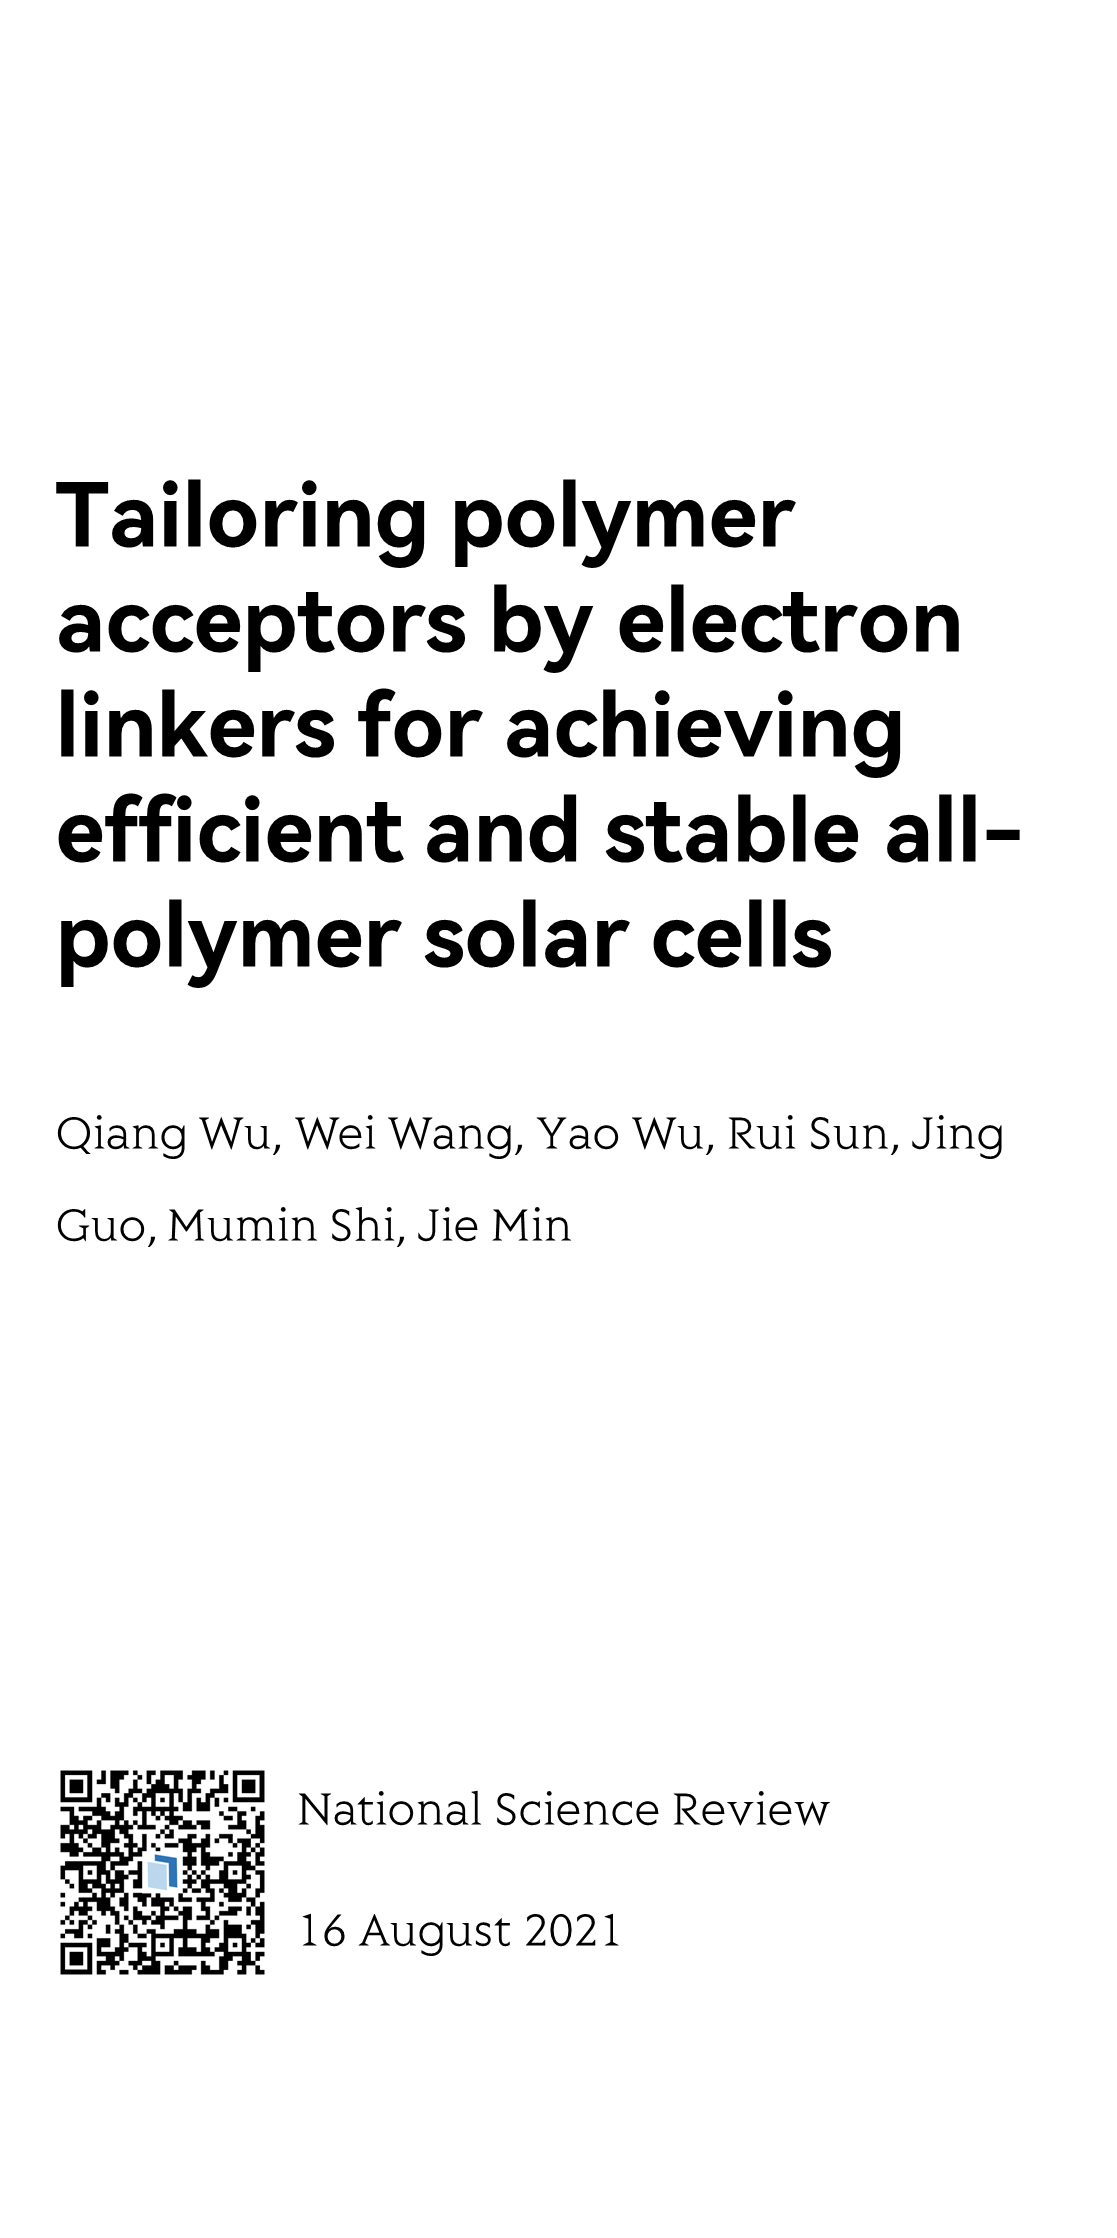 Tailoring polymer acceptors by electron linkers for achieving efficient and stable all-polymer solar cells_1